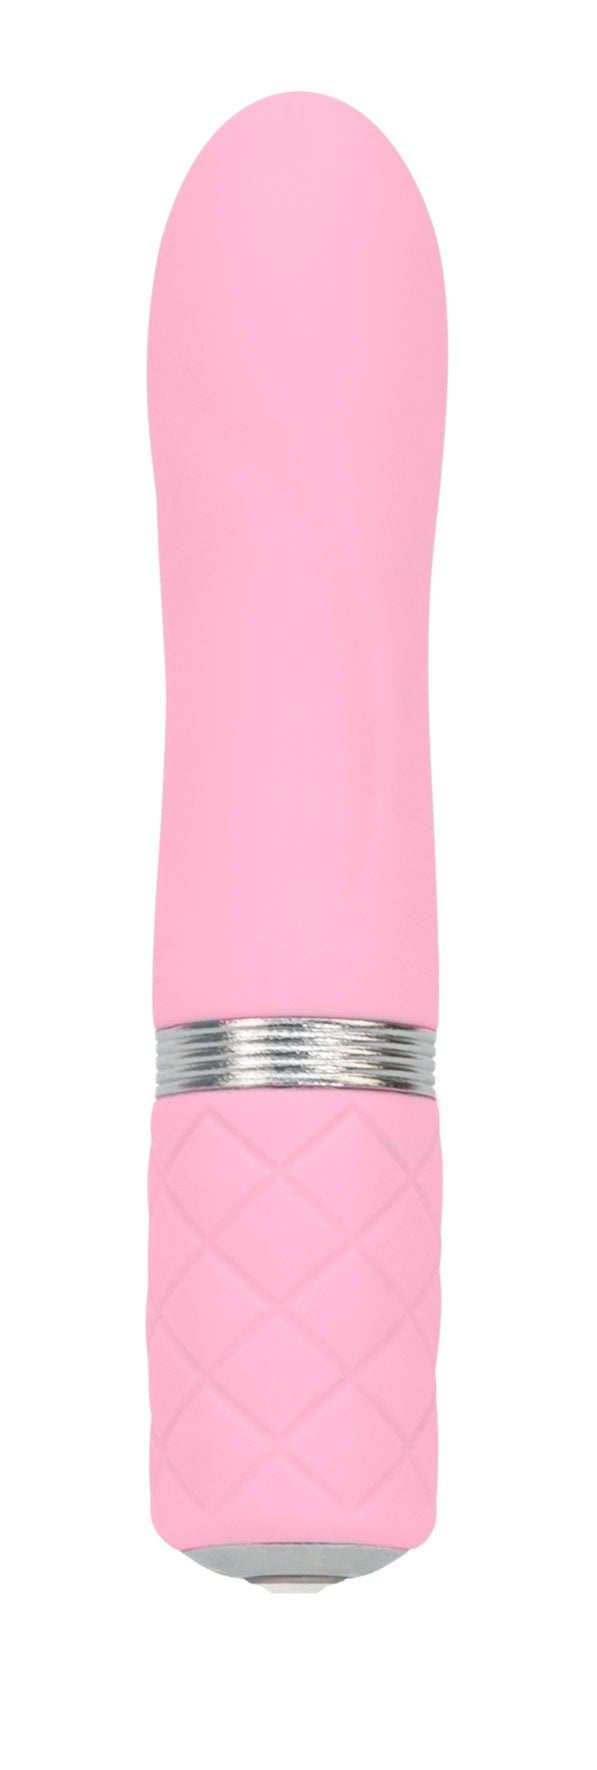 Front view of the bullet vibrator showing its size and textured handle (pink).